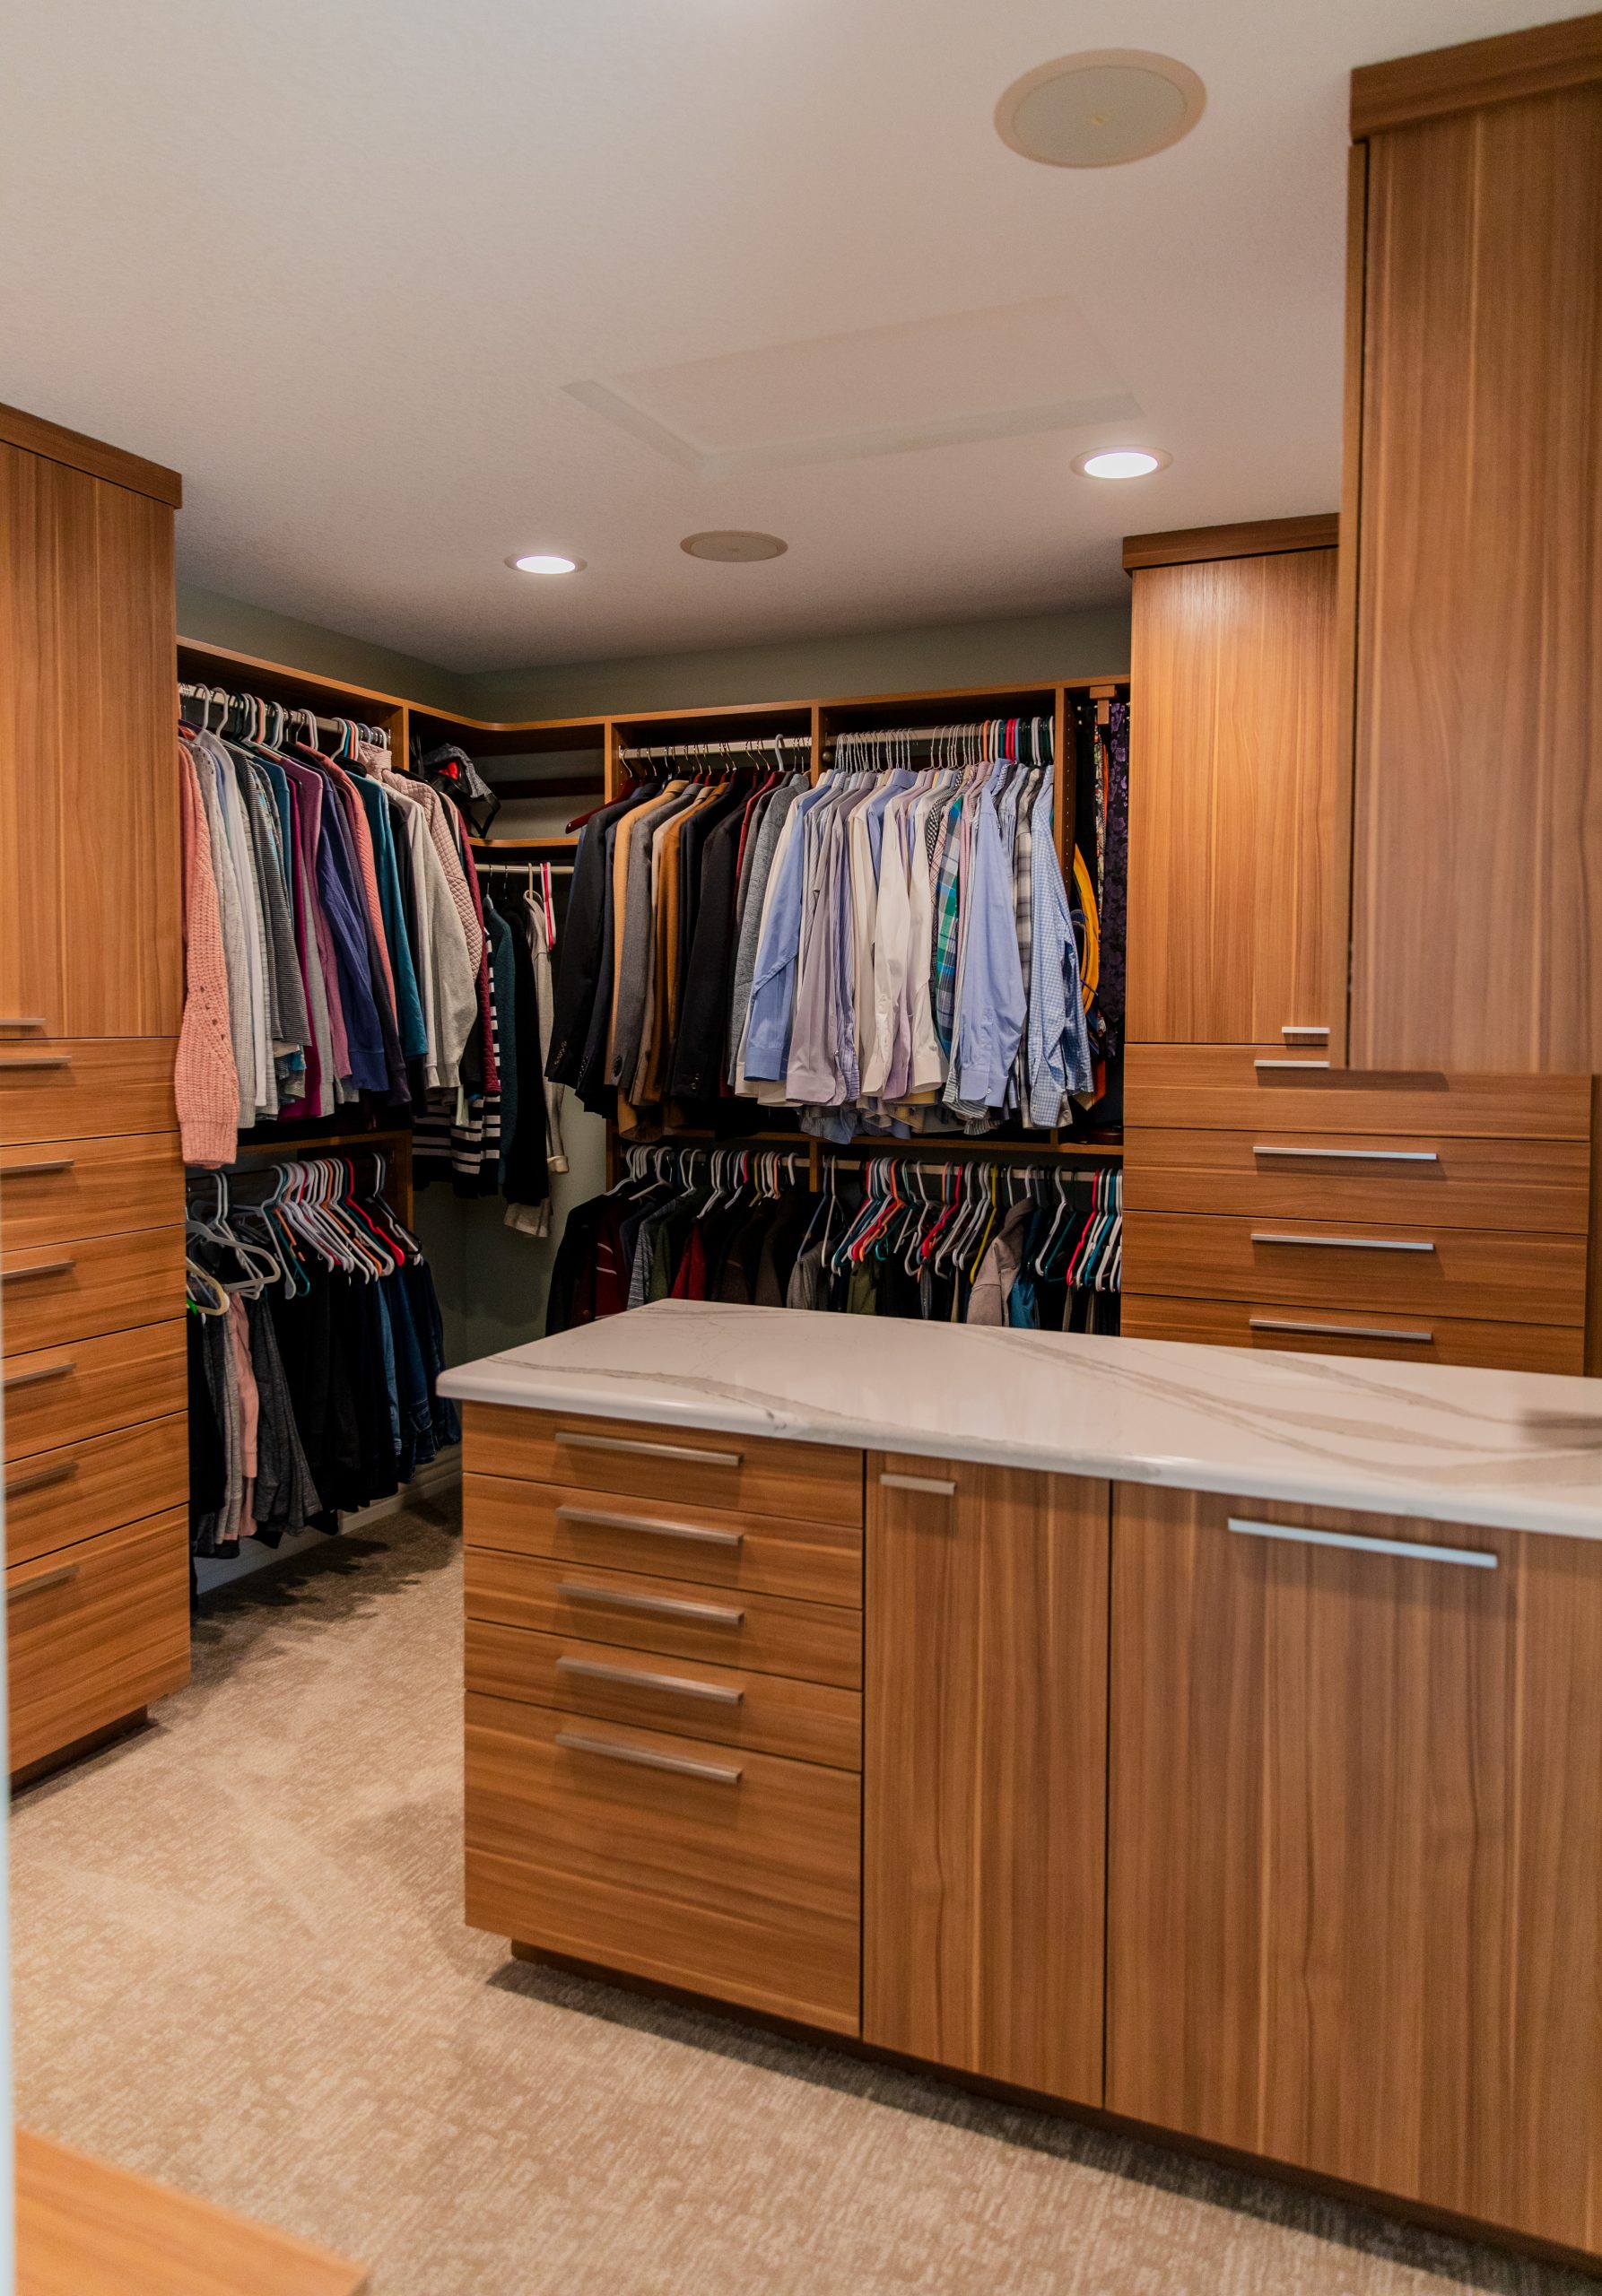 You are currently viewing Closet Organization